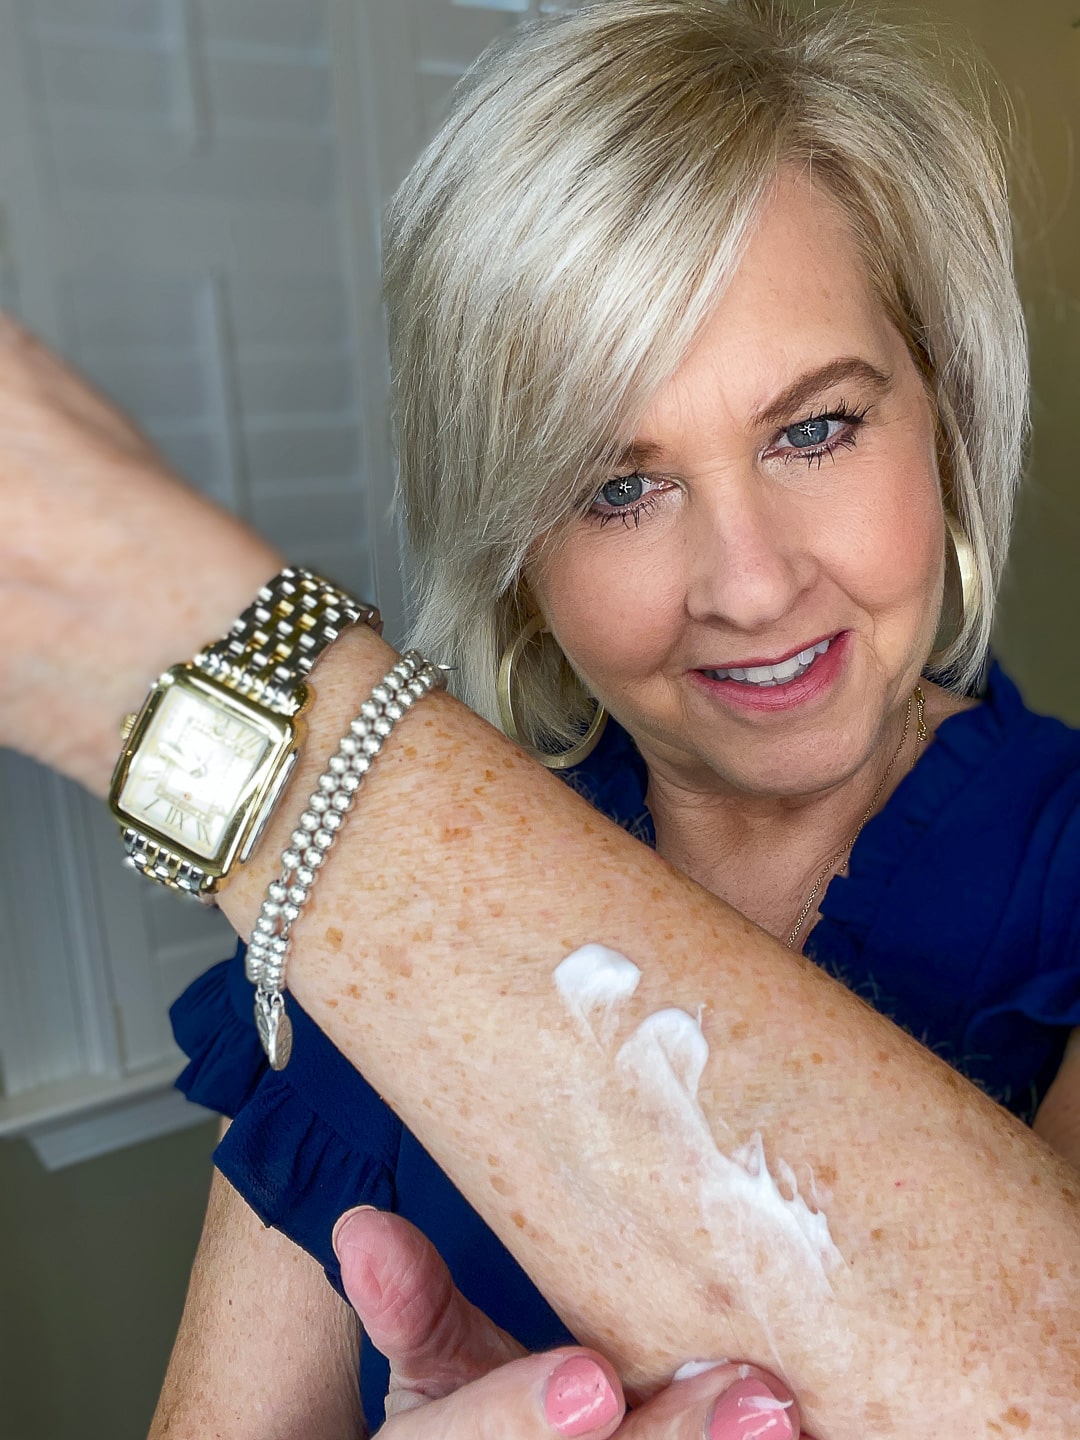 Over 40 Fashion Blogger, Tania Stephens is wearing a blue top and trying City Beauty's Inviscrepe Body Balm12